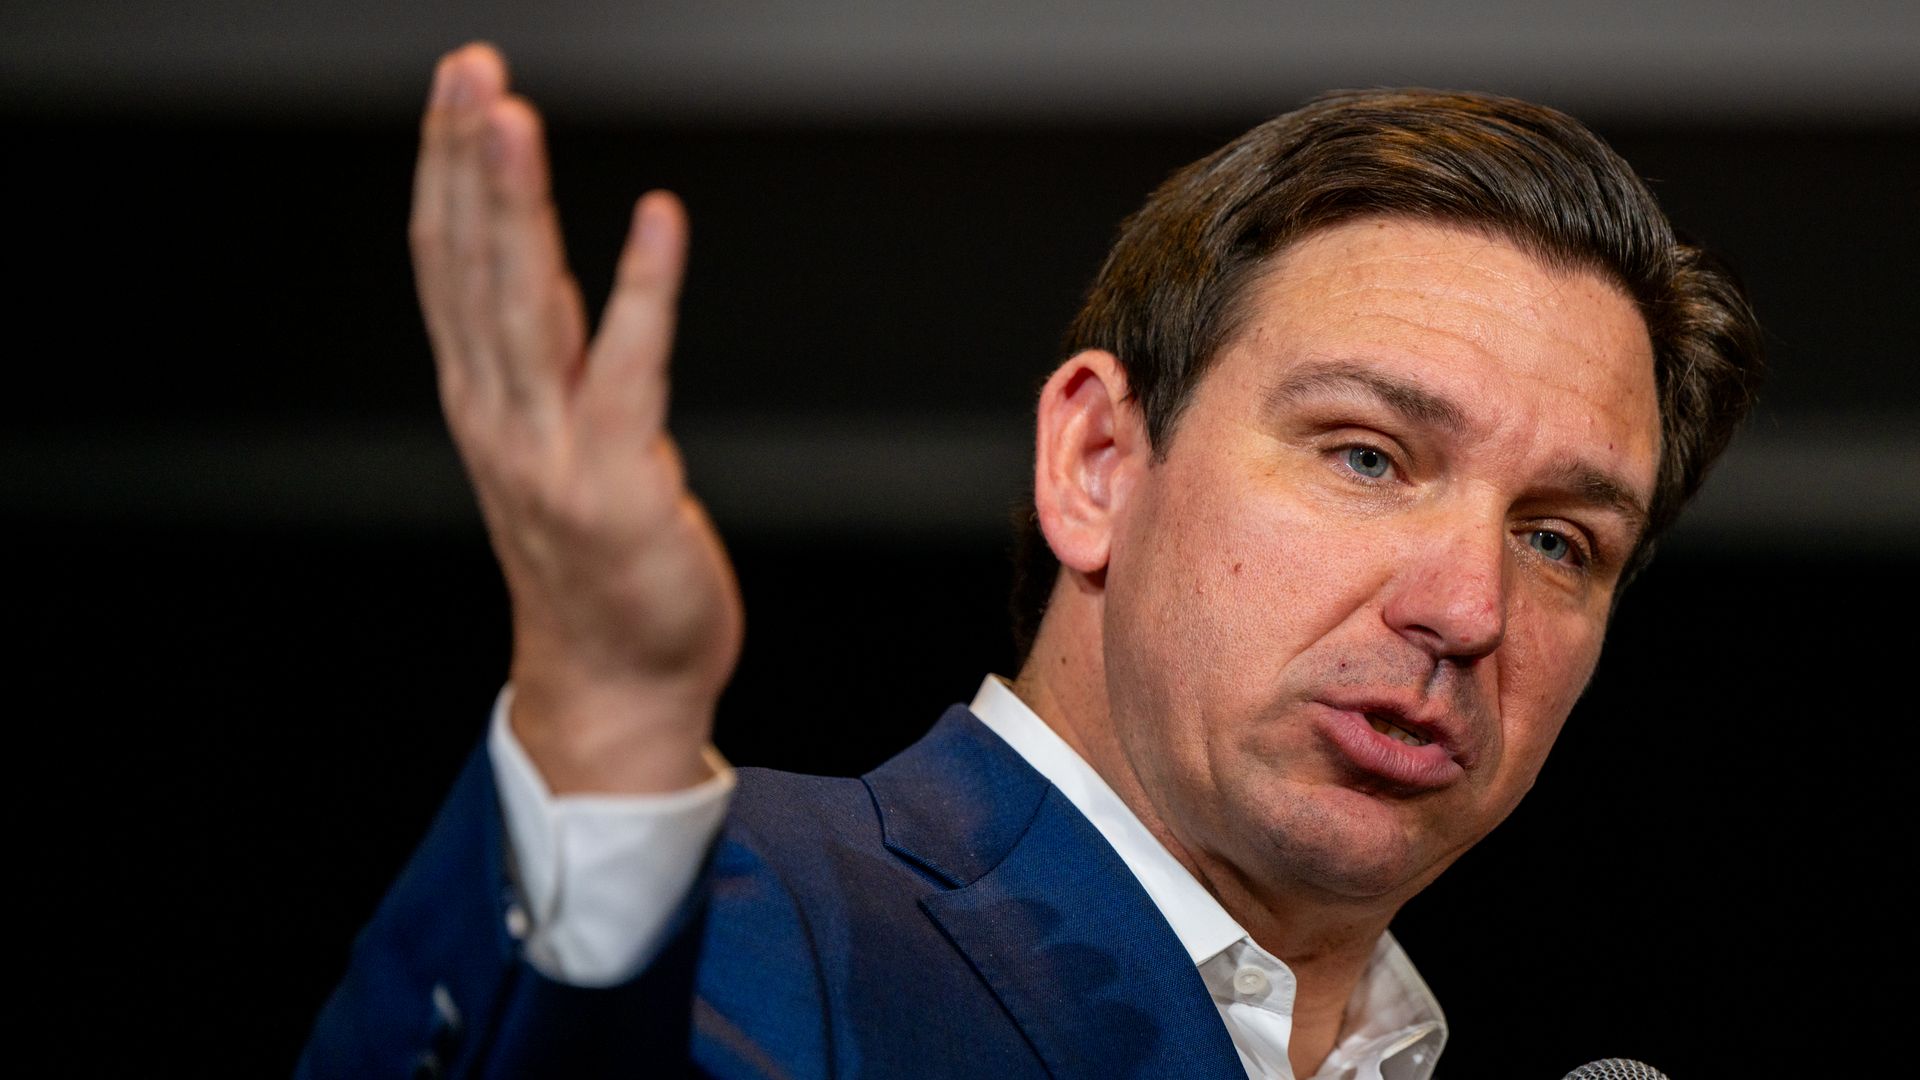 Ron DeSantis speaks into a microphone and gestures with his right hand.